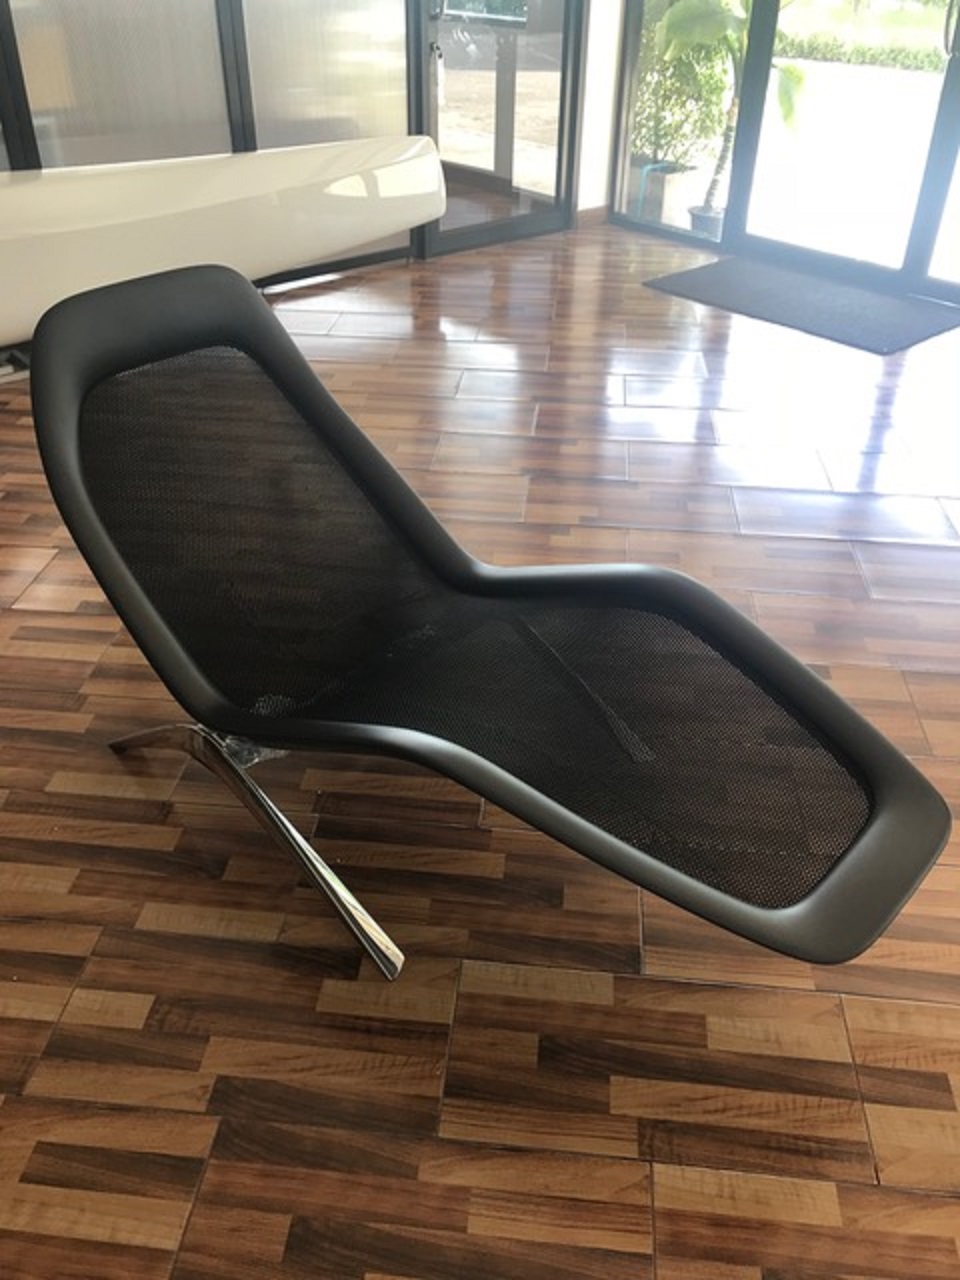 The Carbon Chaise will also be on display.